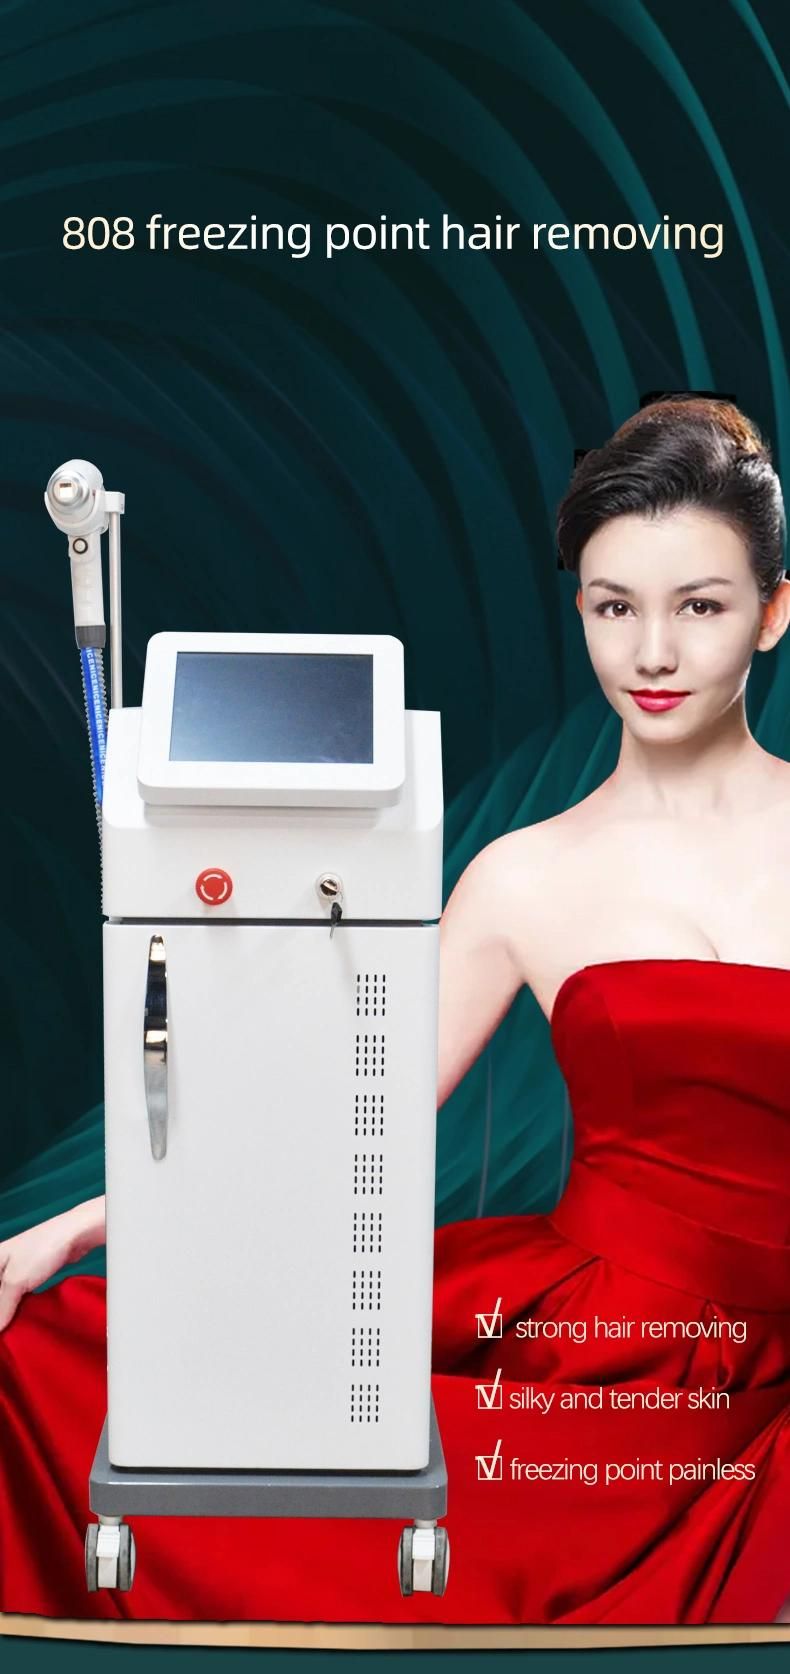 Newest Diode Laser Hair Removal Machine / 808nm Diode Laser Hair Removal /Big Spot Size Bikini Line Diode 755 808 1064 Laser